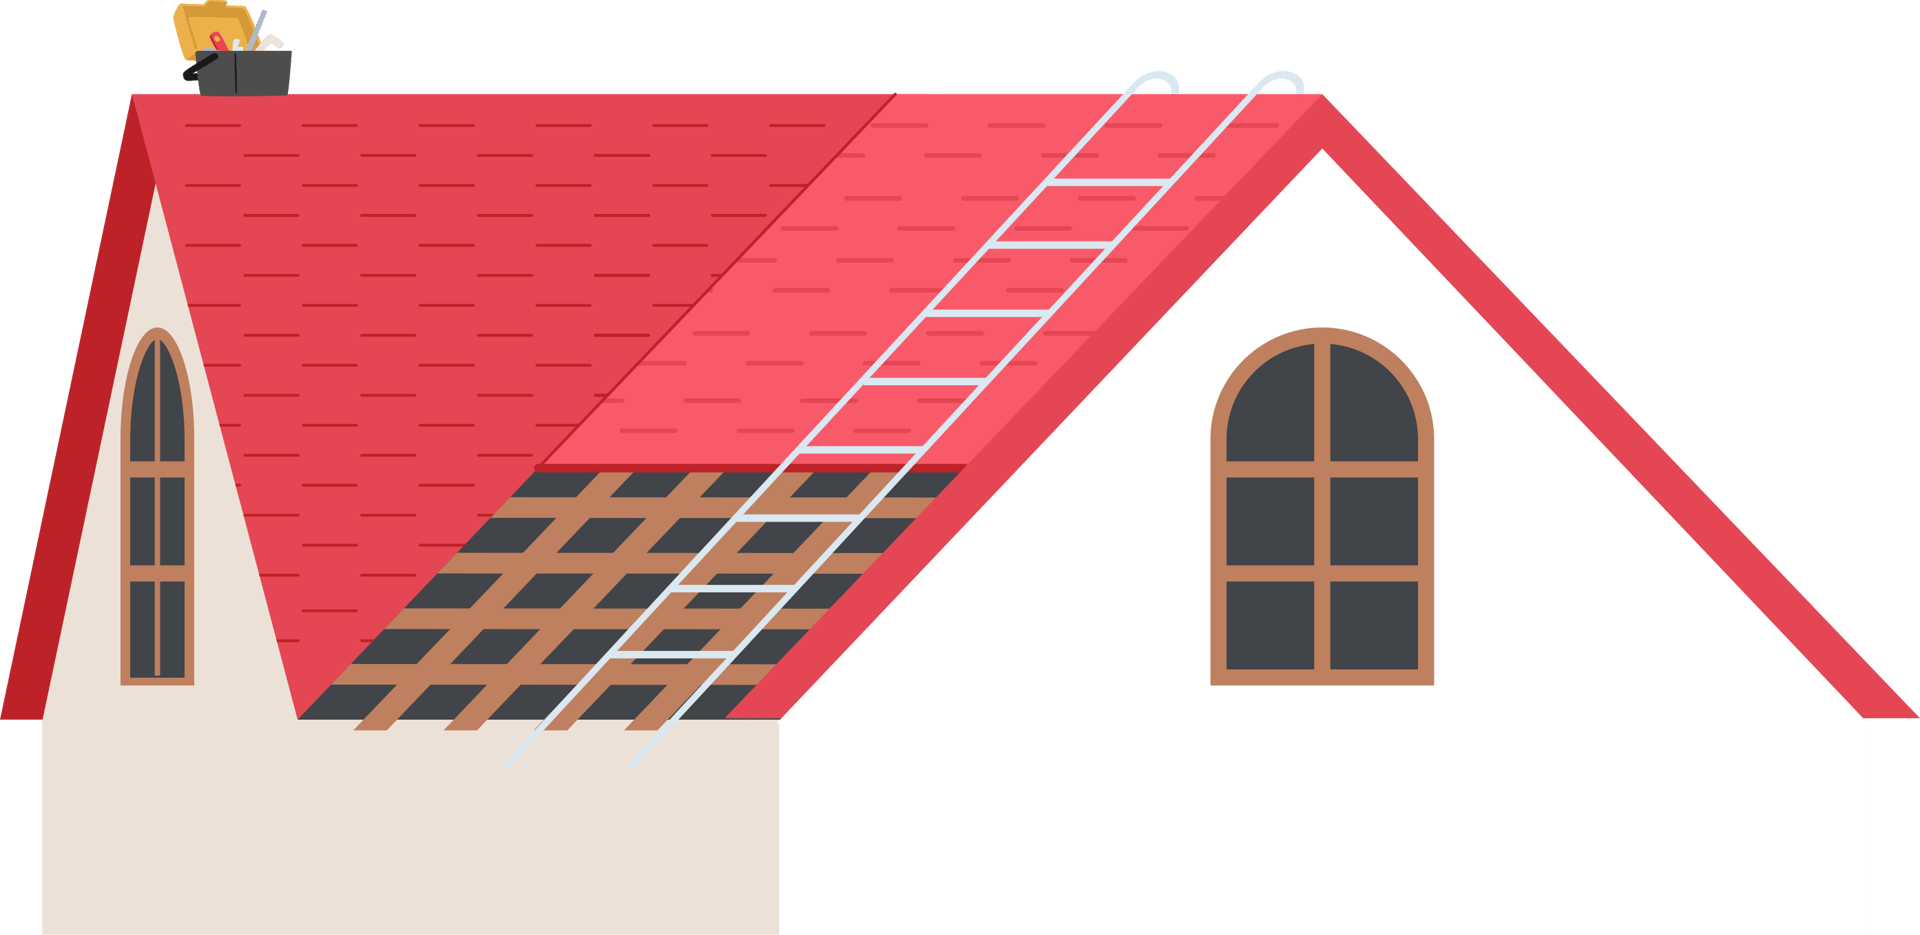 Illustration of a roof under construction